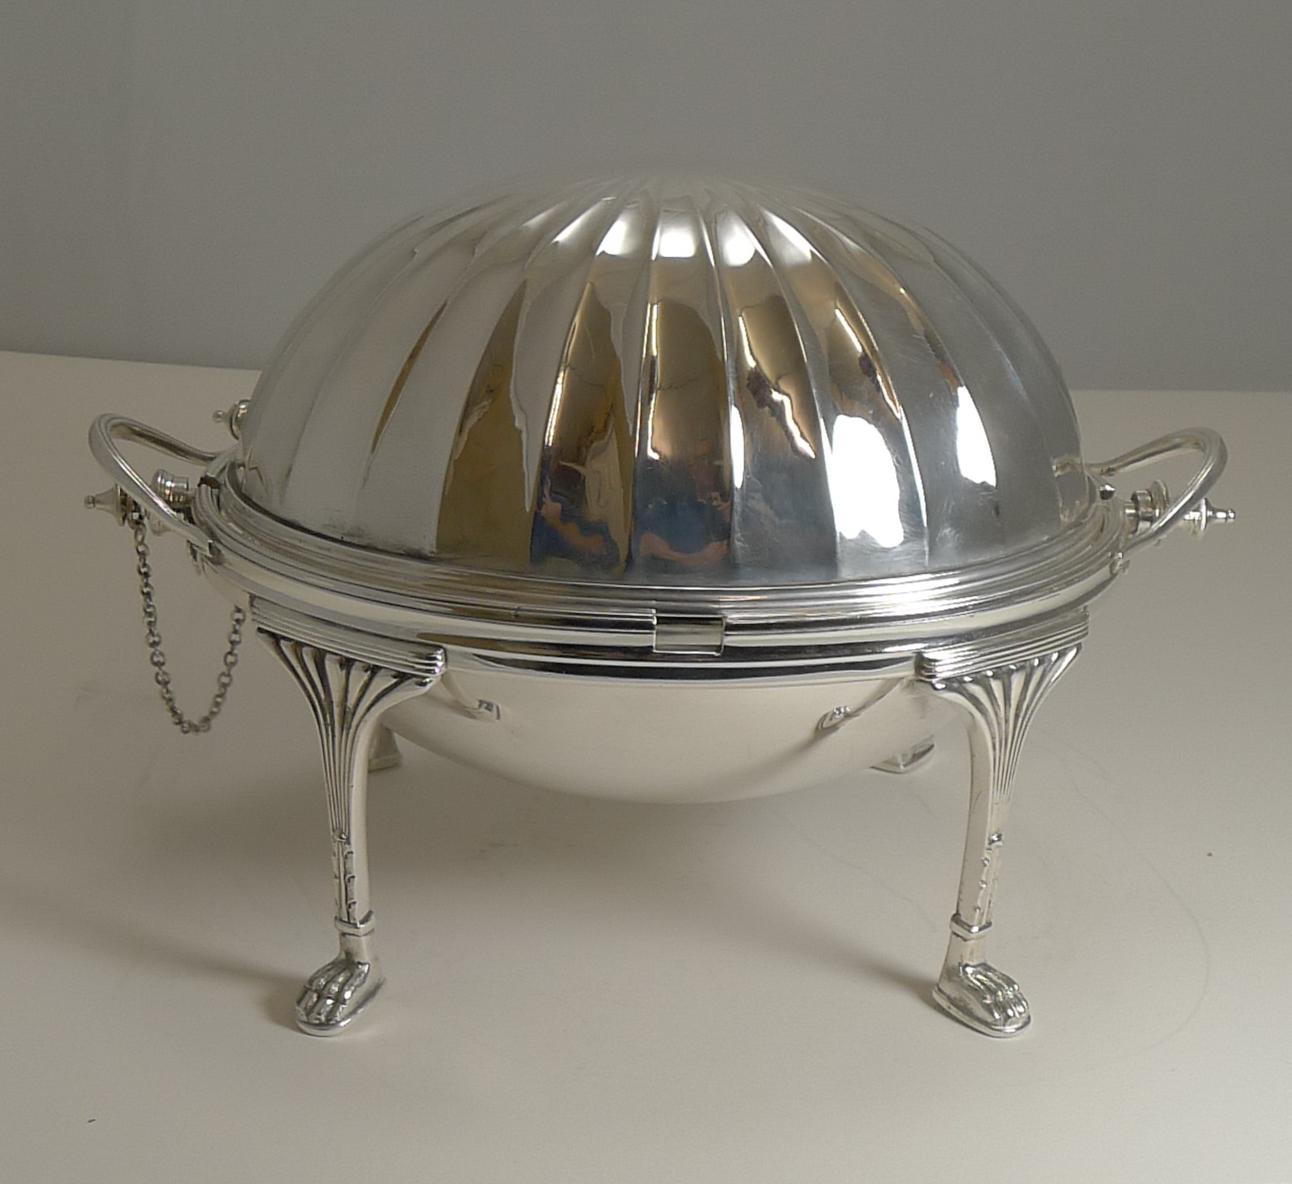 Late 19th Century Antique English Silver Plated Revolving Breakfast / Serving Dish, Mappin & Webb